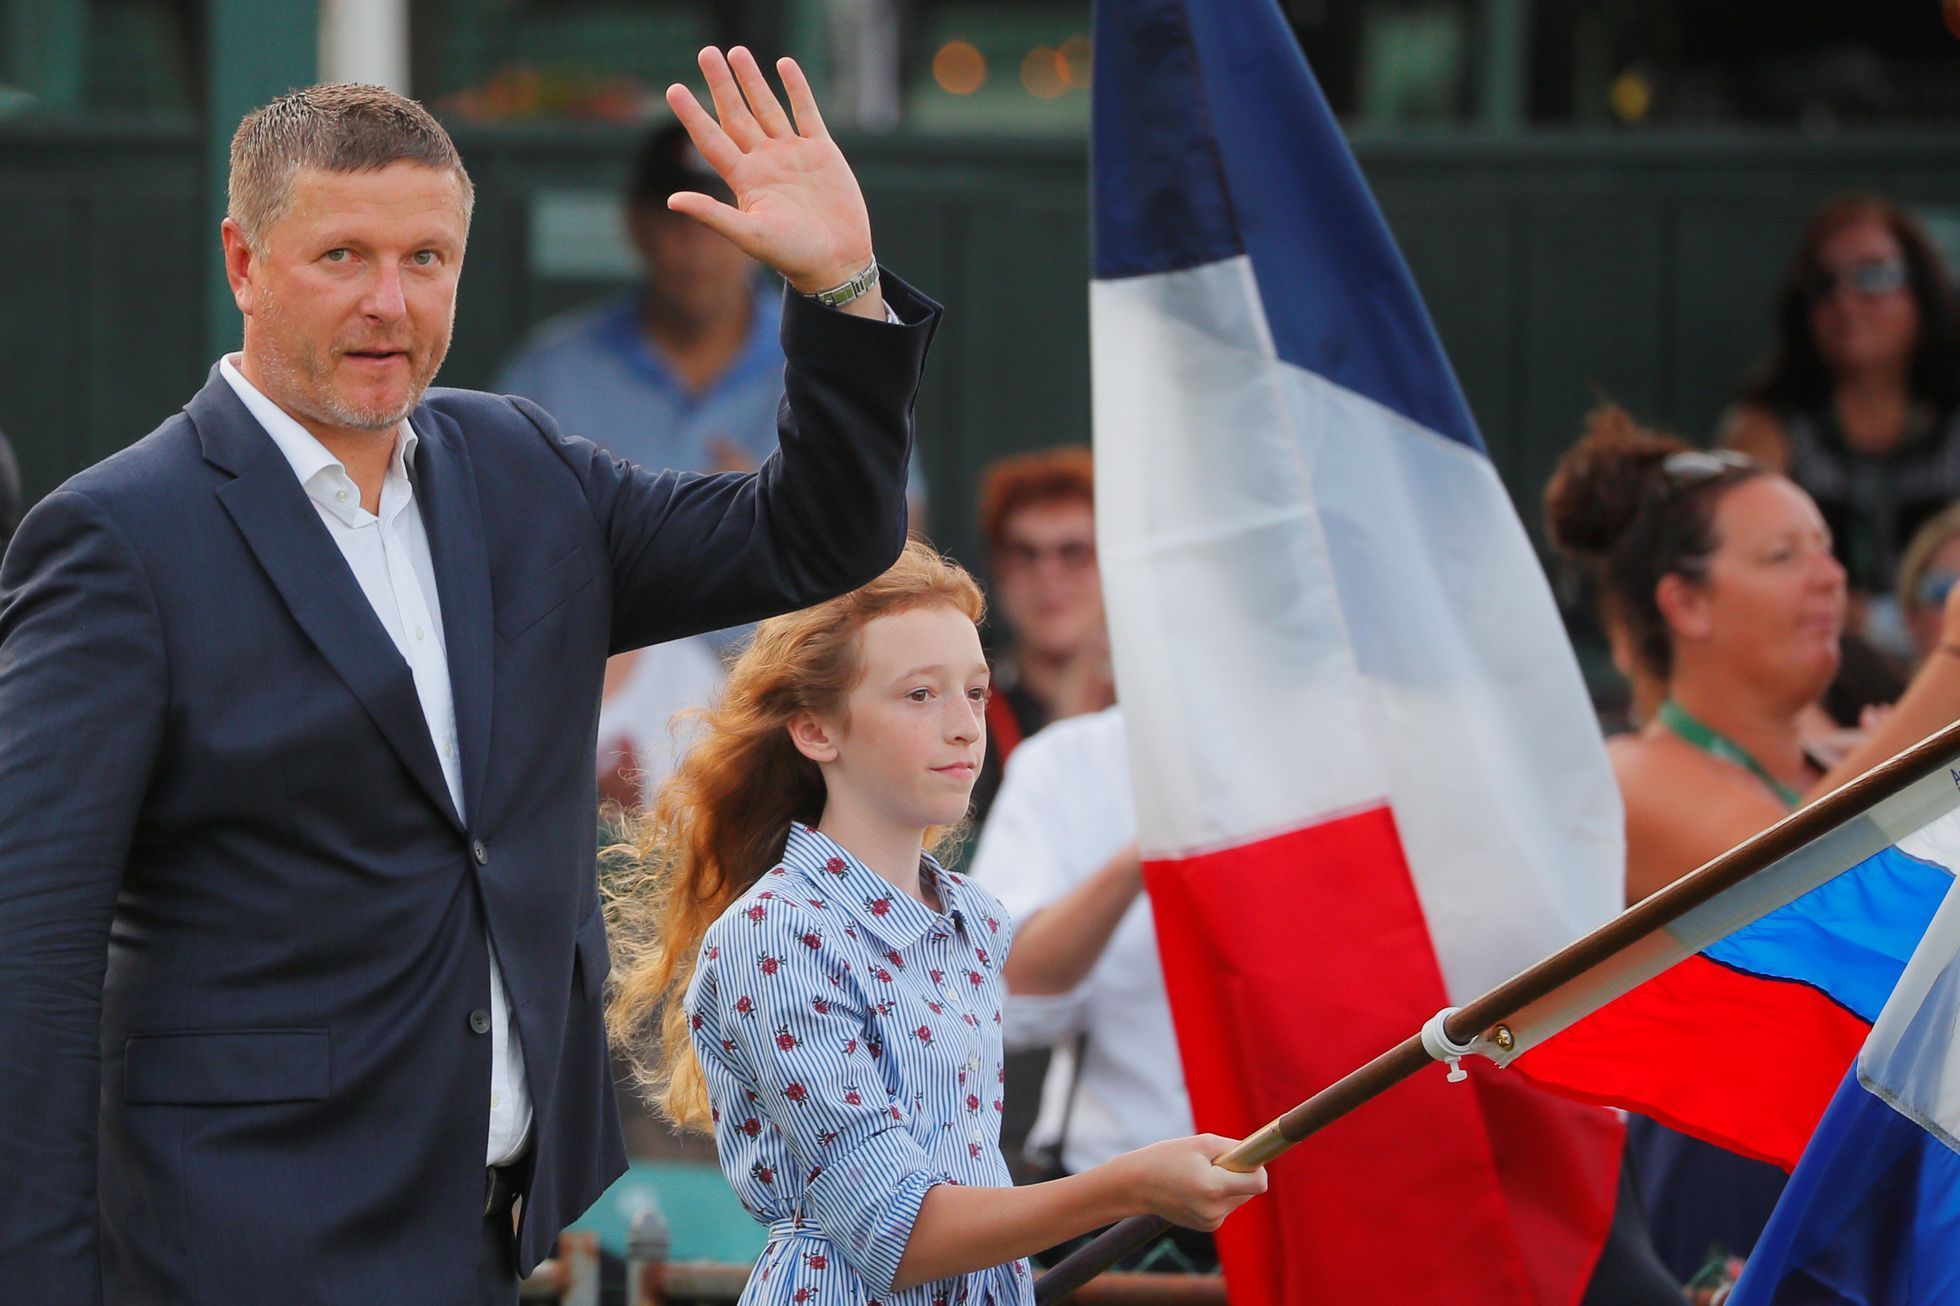 Jevgenij Kafelnikov of Russia takes the stage to be inducted into the International Tennis Hall of Fame in Newport